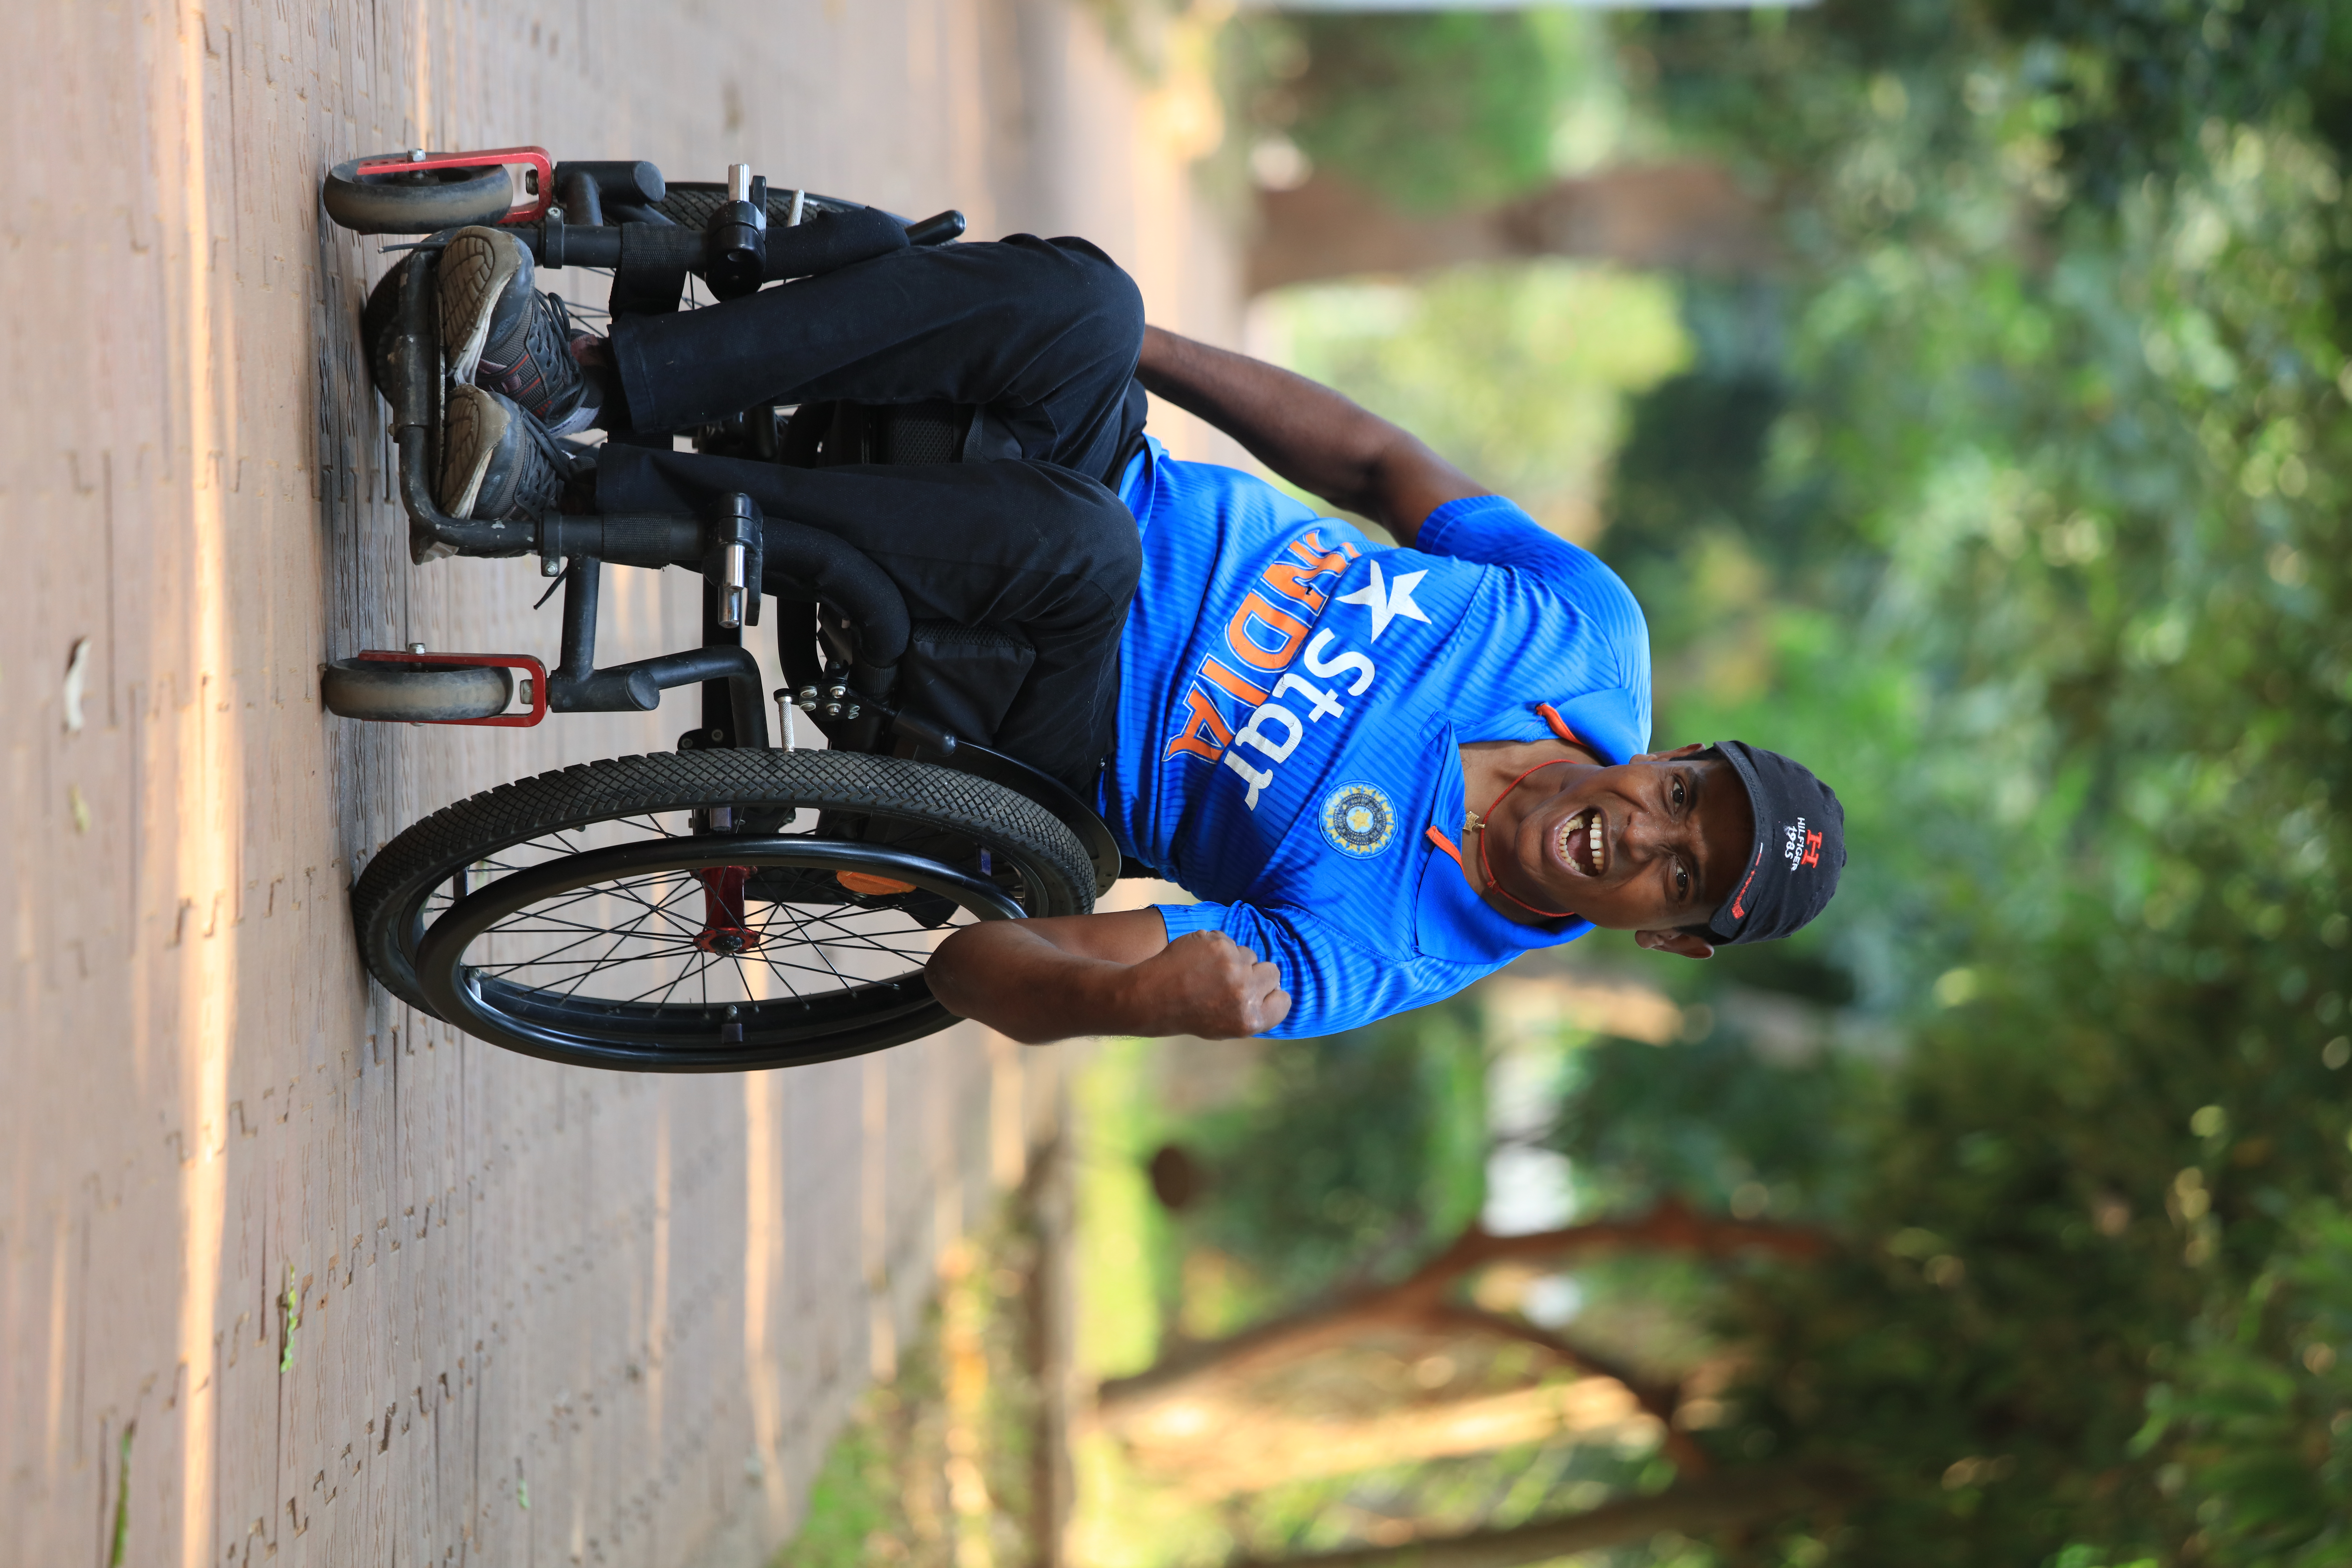 first odia pwd star to attempt greatest distance by wheelchair in 24 hours, eye on Guinness world records